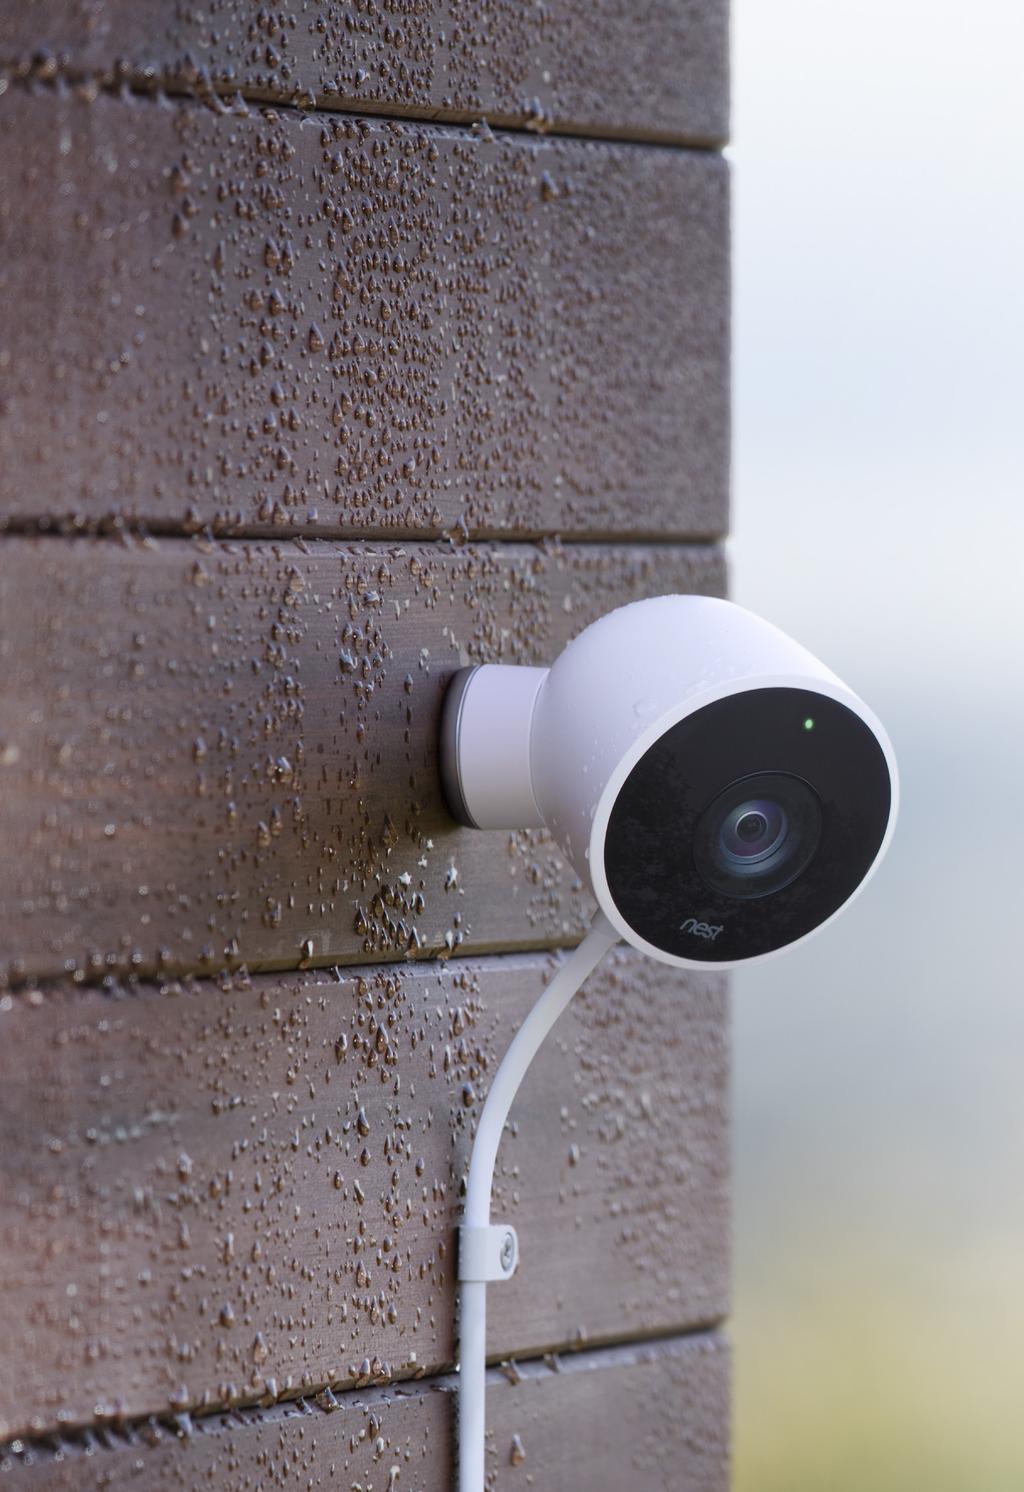 Nest Cam Outdoor Security, rain or shine. On your phone 24/7. Weatherproof.